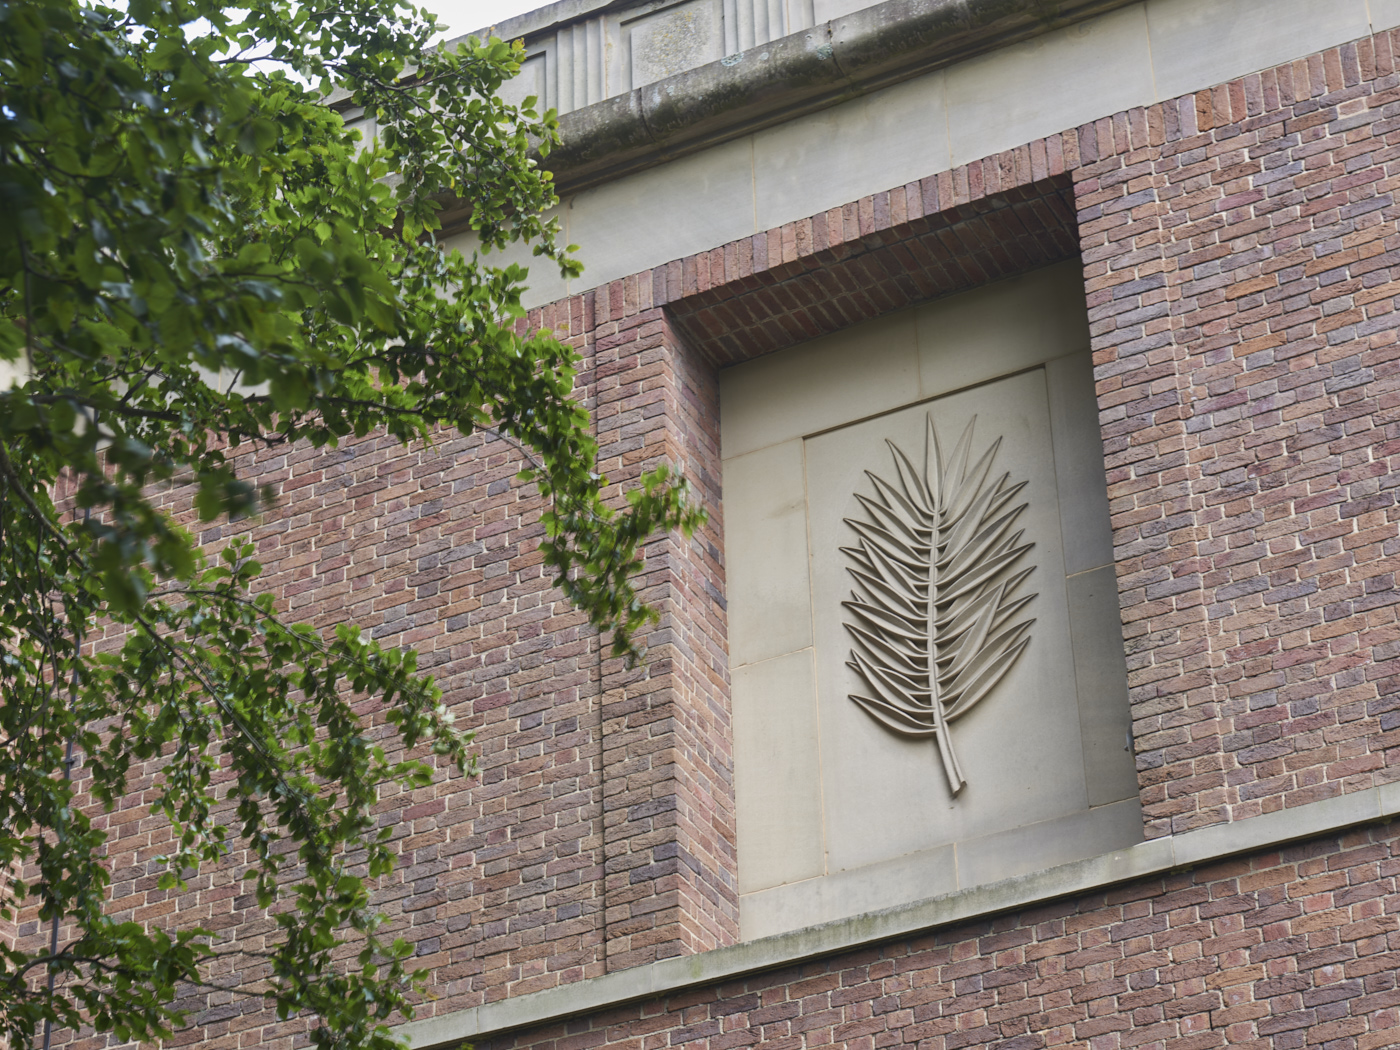 Carved stone panel set into the wall of the Barber Institute of Fine Arts by Gordon Herickx featuring a carving of a palm